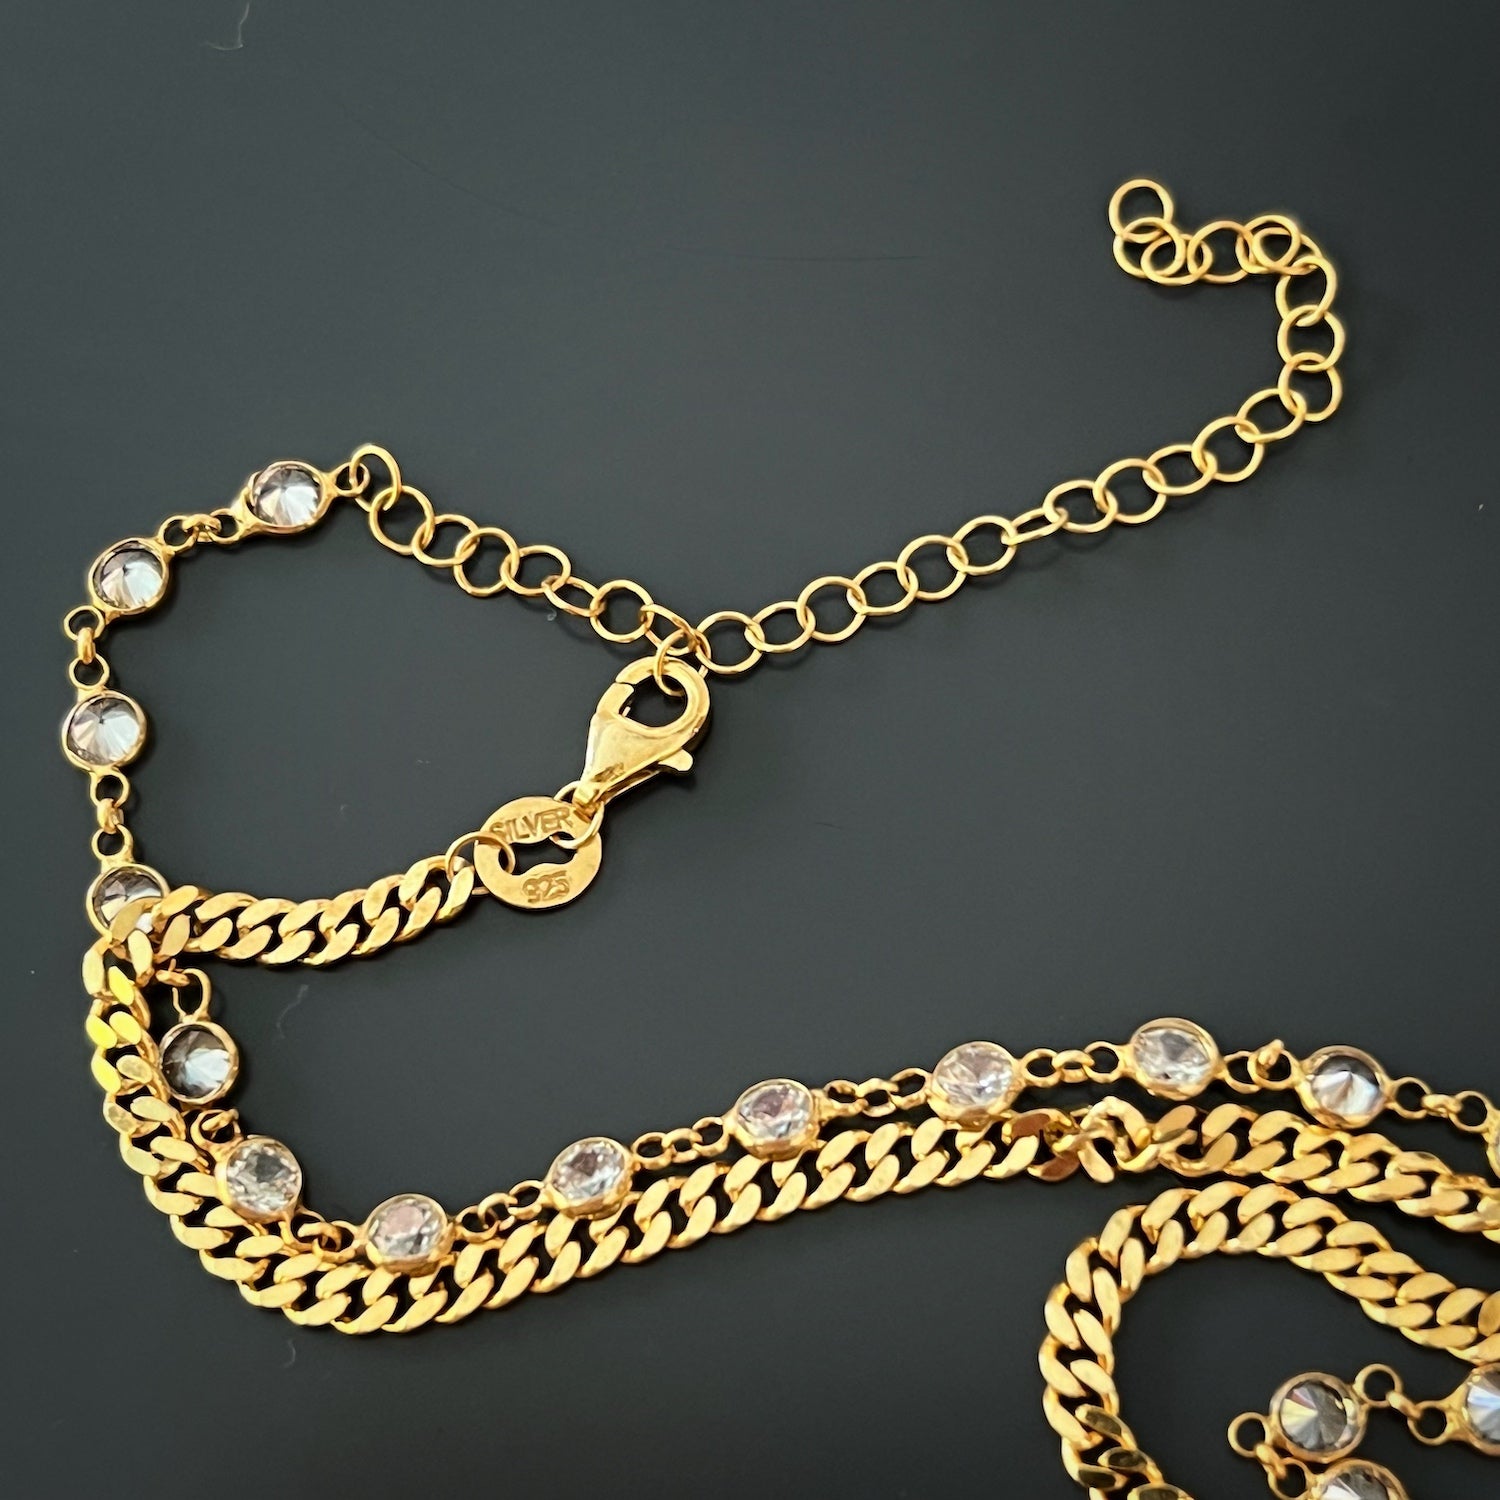 the Panther Gold Chain Necklace, showcasing its choker length and adjustable size for a comfortable fit.